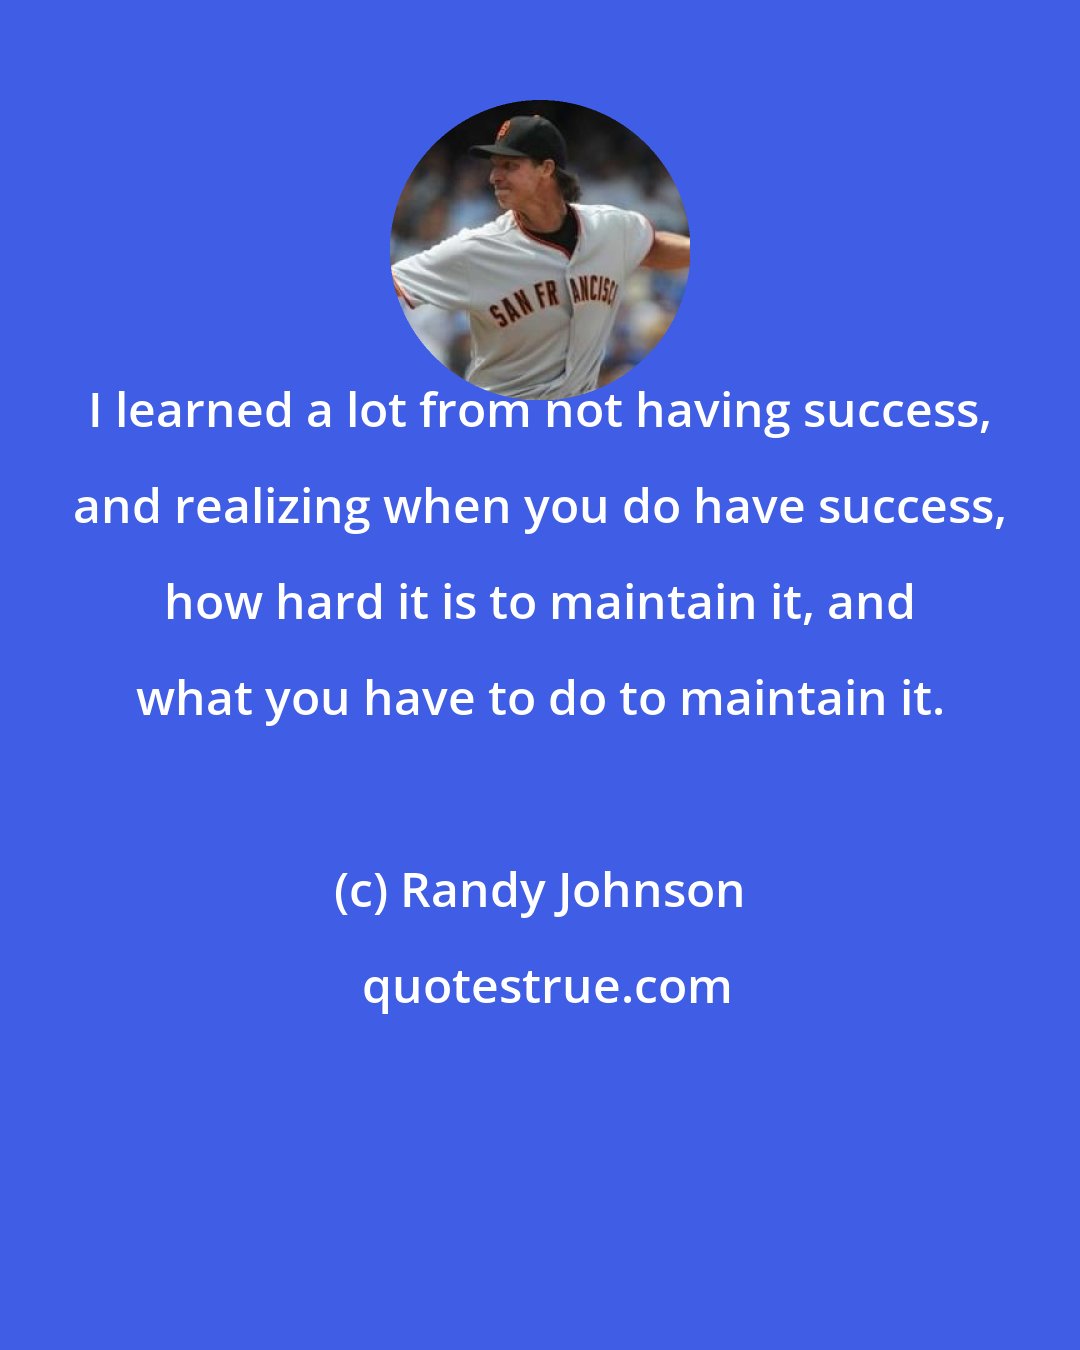 Randy Johnson: I learned a lot from not having success, and realizing when you do have success, how hard it is to maintain it, and what you have to do to maintain it.